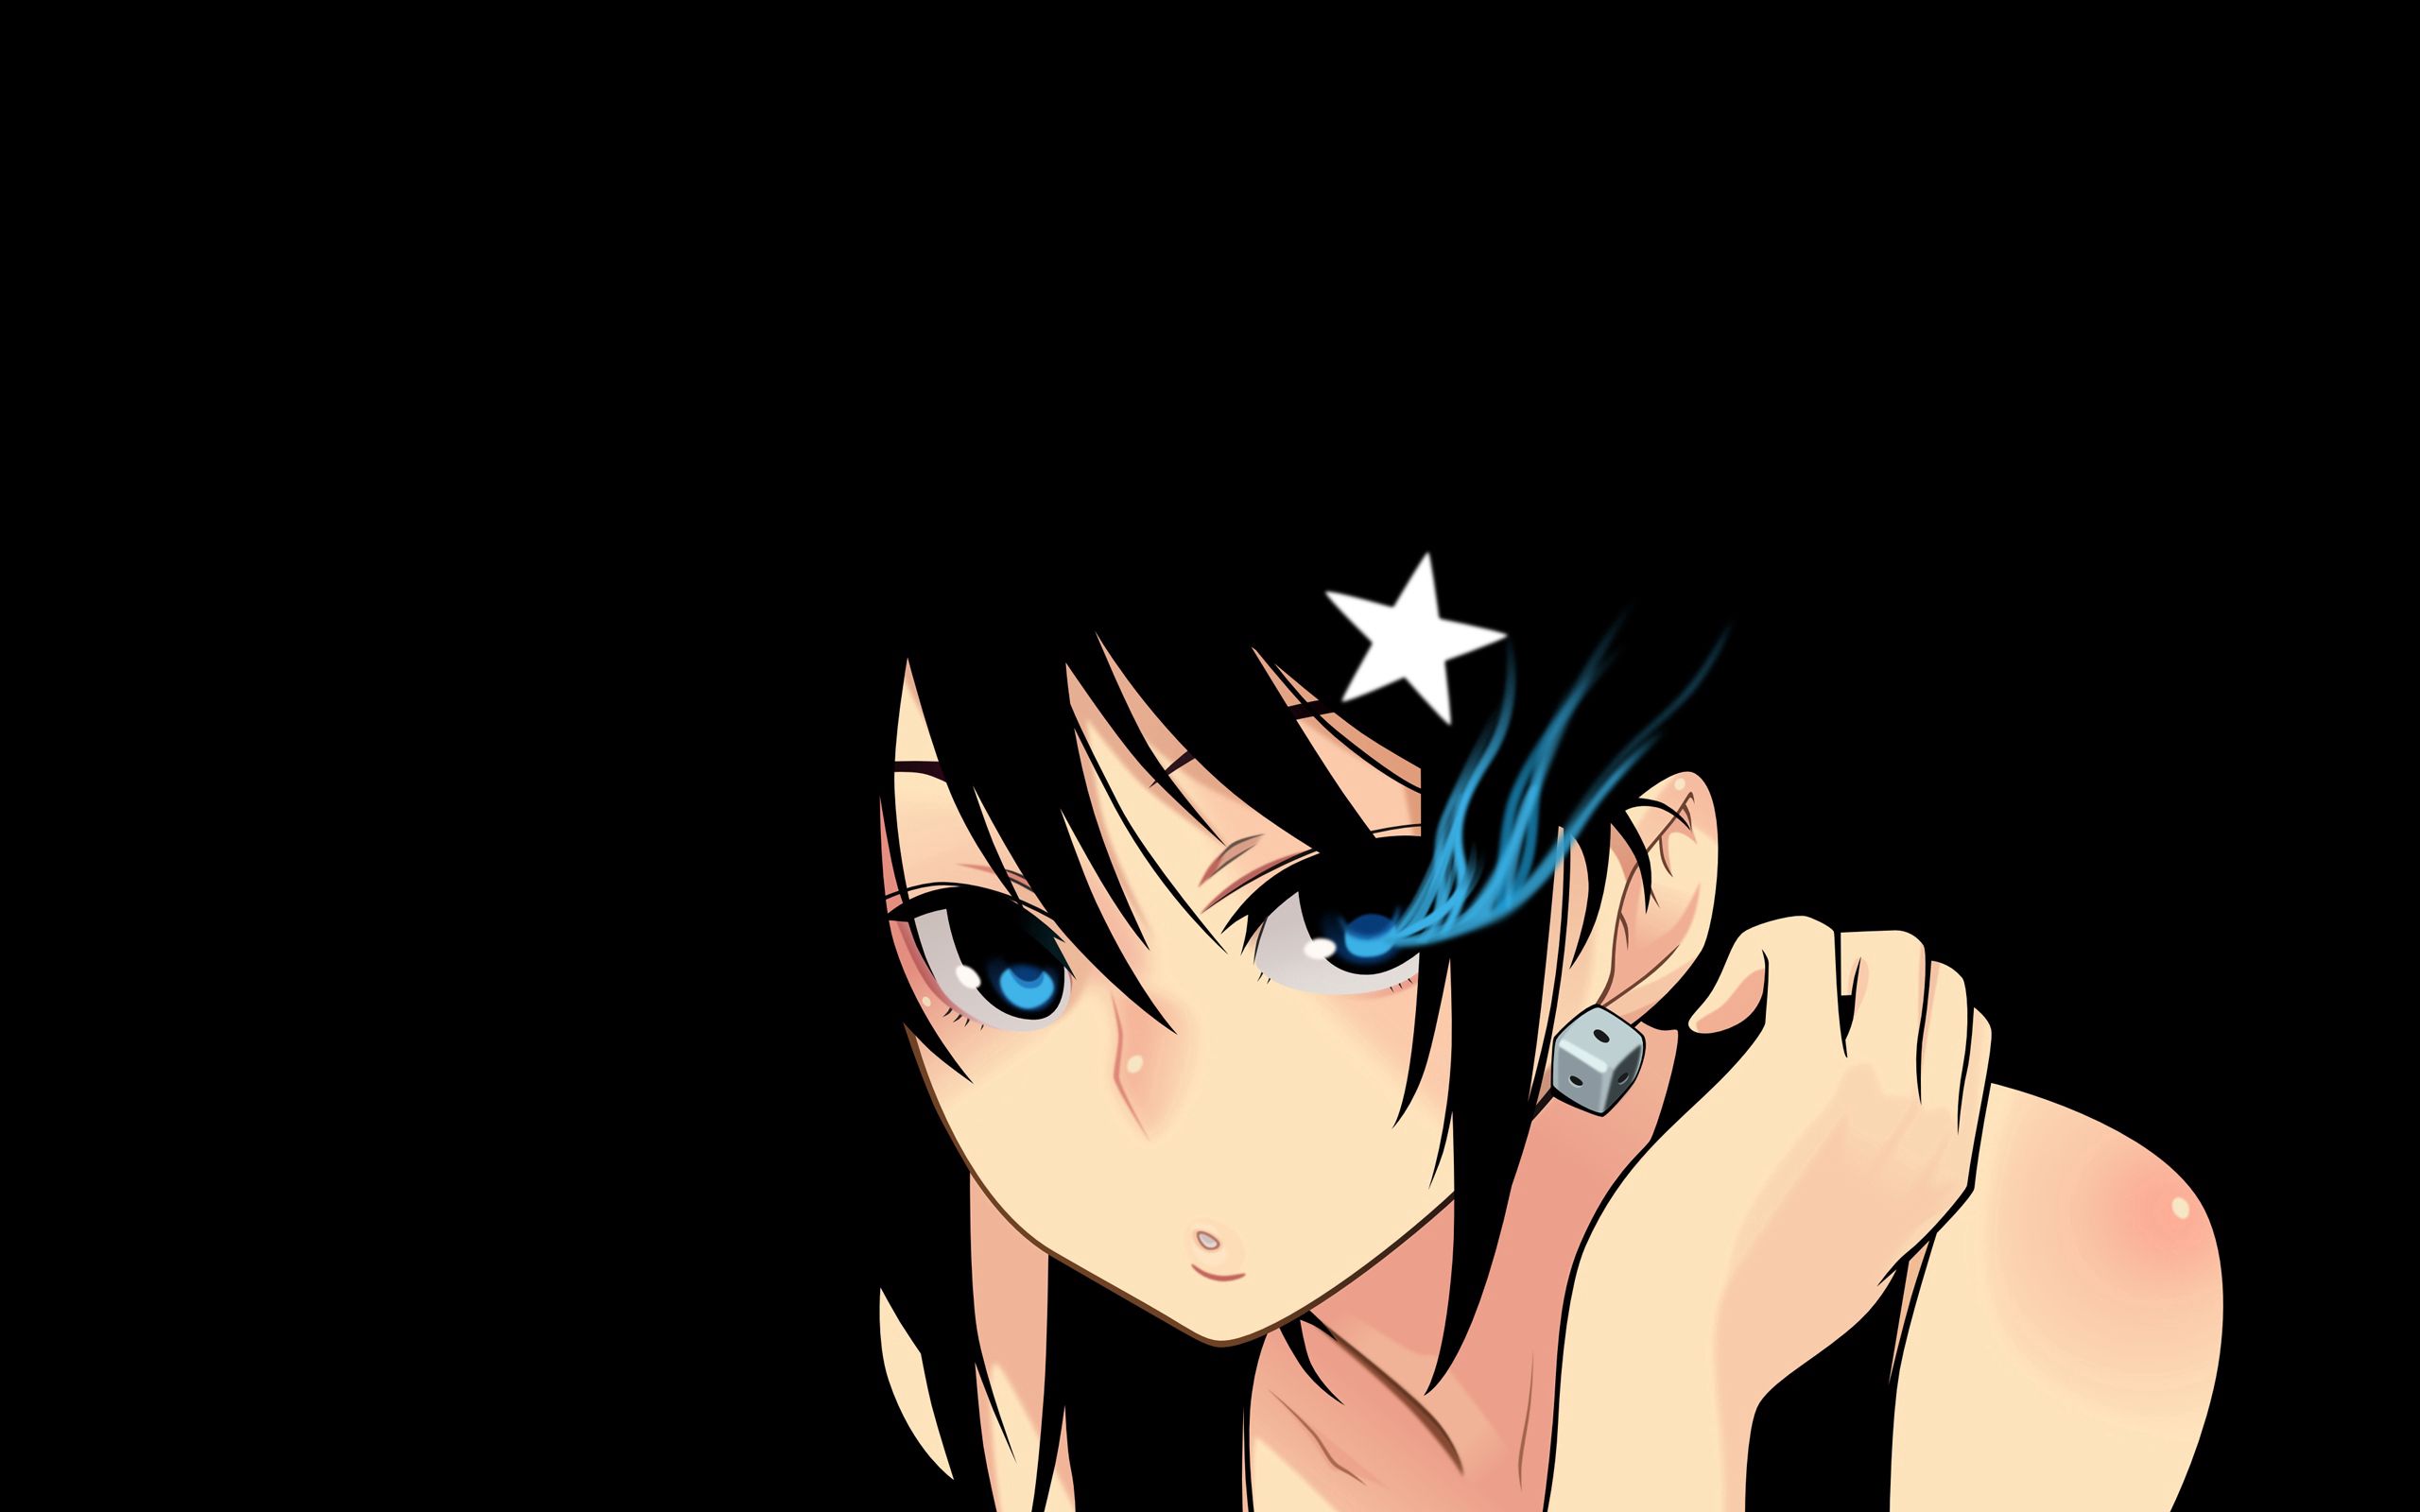 116743 download wallpaper anime, darkness, girl, brunette screensavers and pictures for free